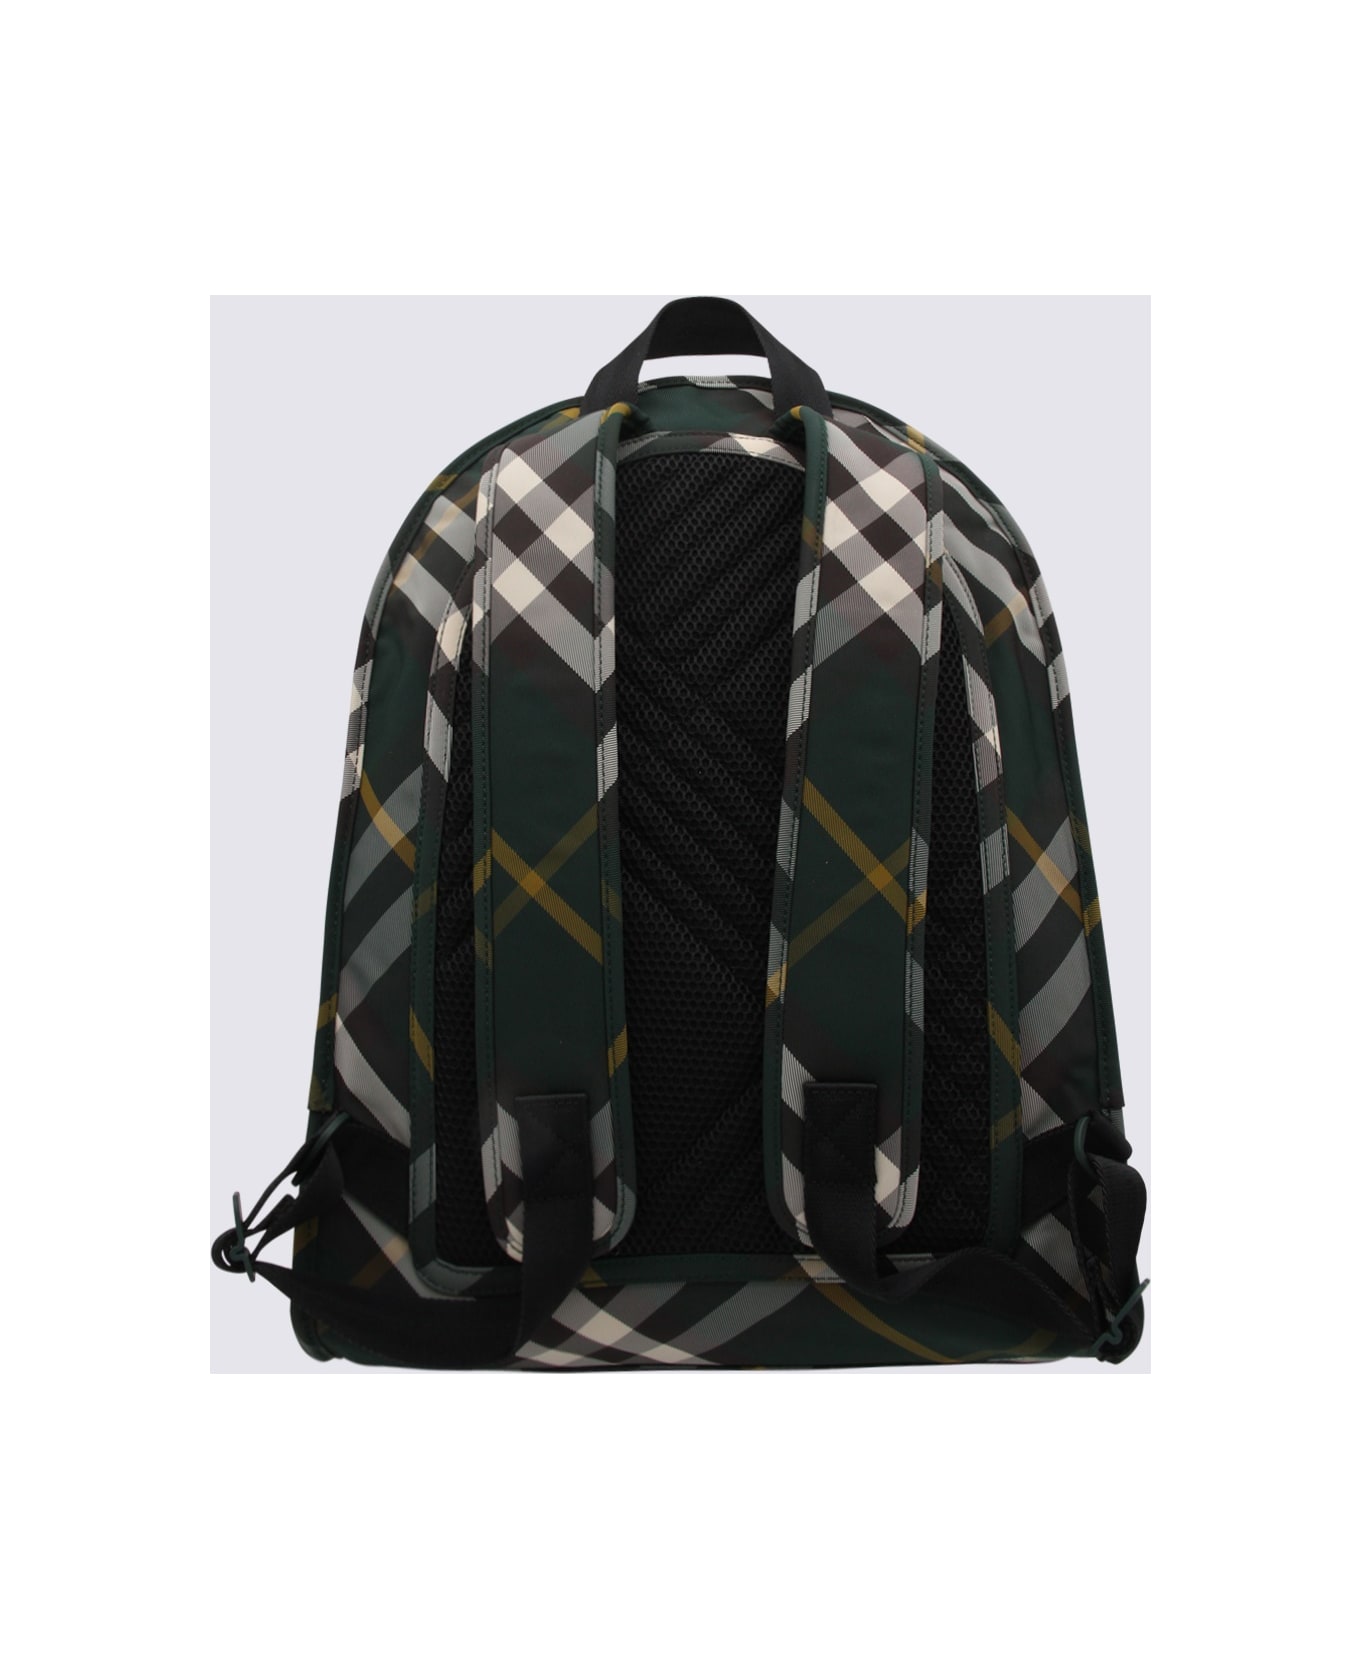 Burberry Green Backpack - IVY